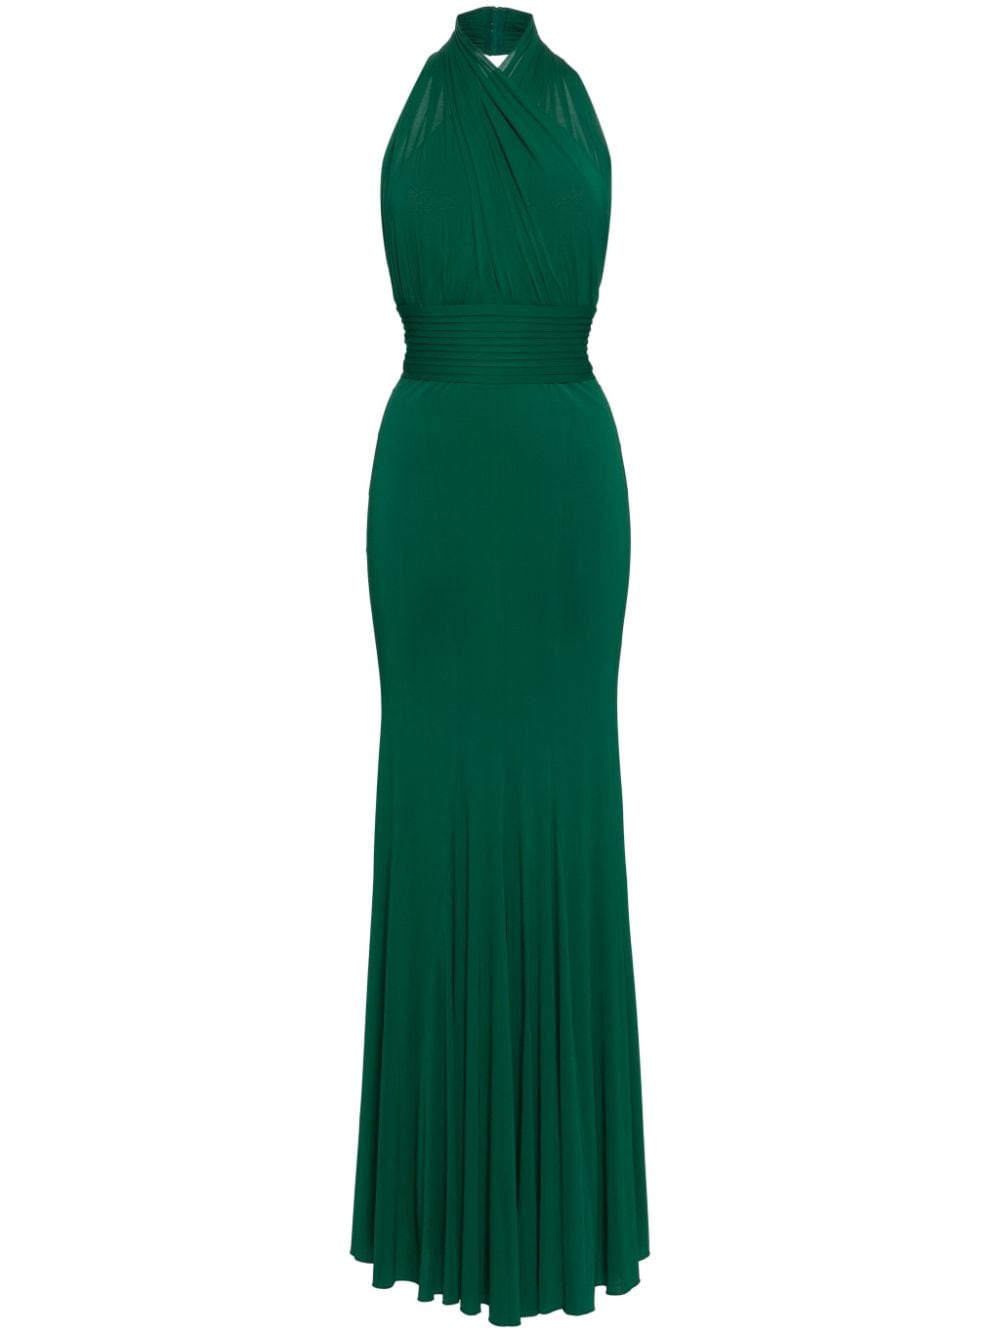 Herve L Leroux Open-back Fishtail Gown In Green